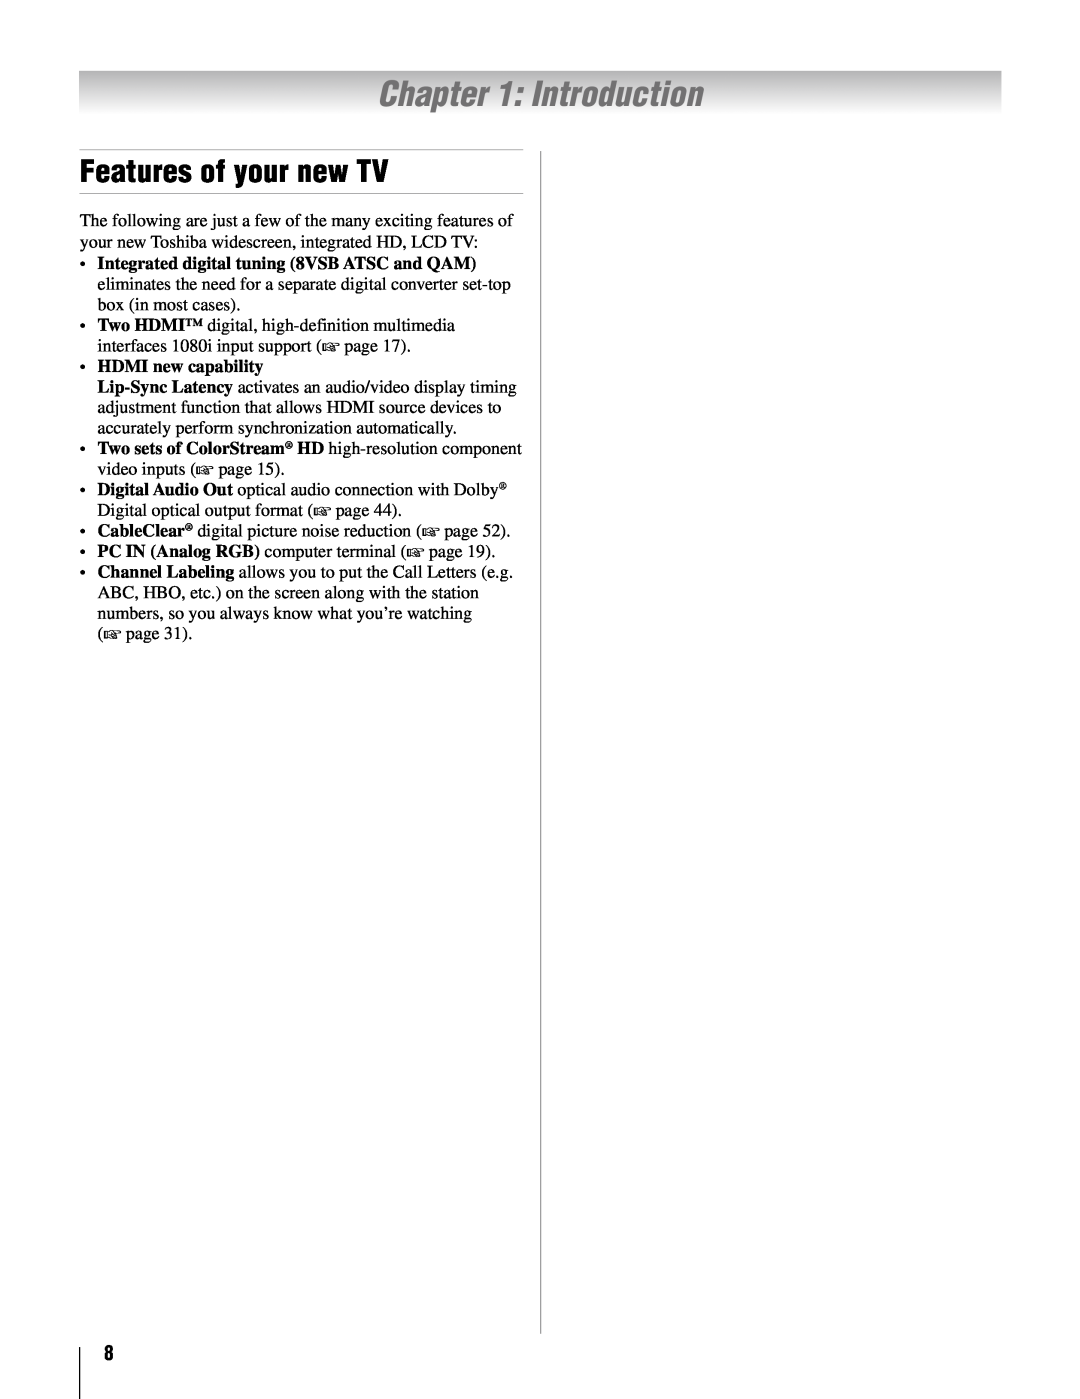 Toshiba 37AV52U, 32AV502U, 32AV50SU, 37AV502U, 26AV52U, 26AV502U owner manual Introduction, Features of your new TV 